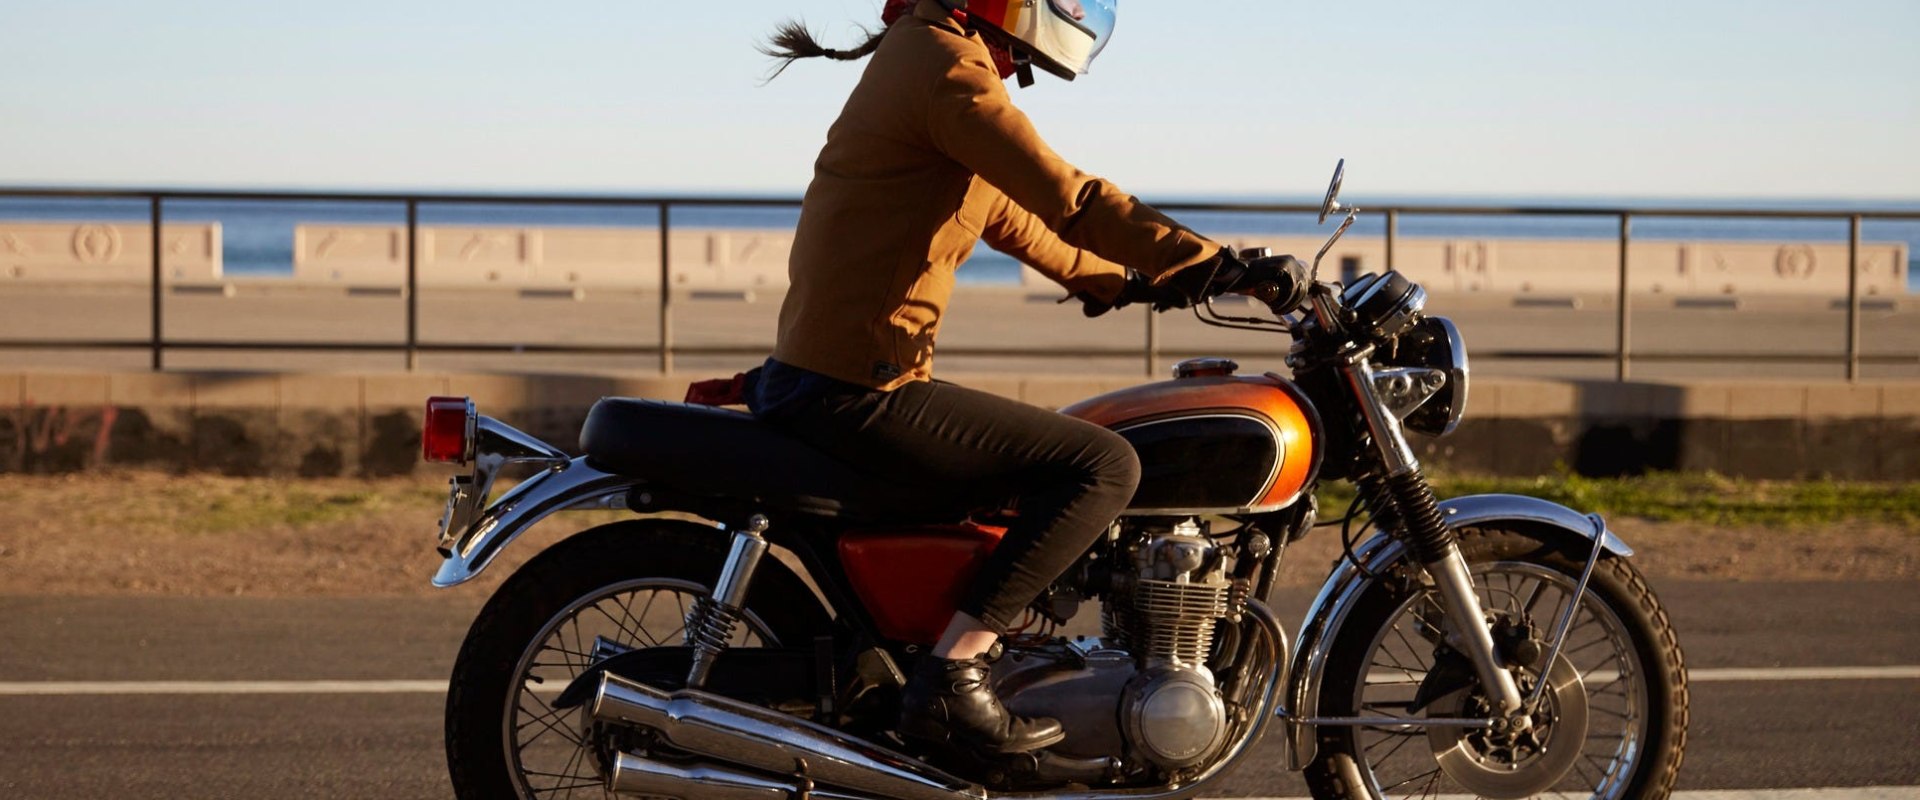 How Much Does Motorcycle Insurance Cost With Farmers Insurance?